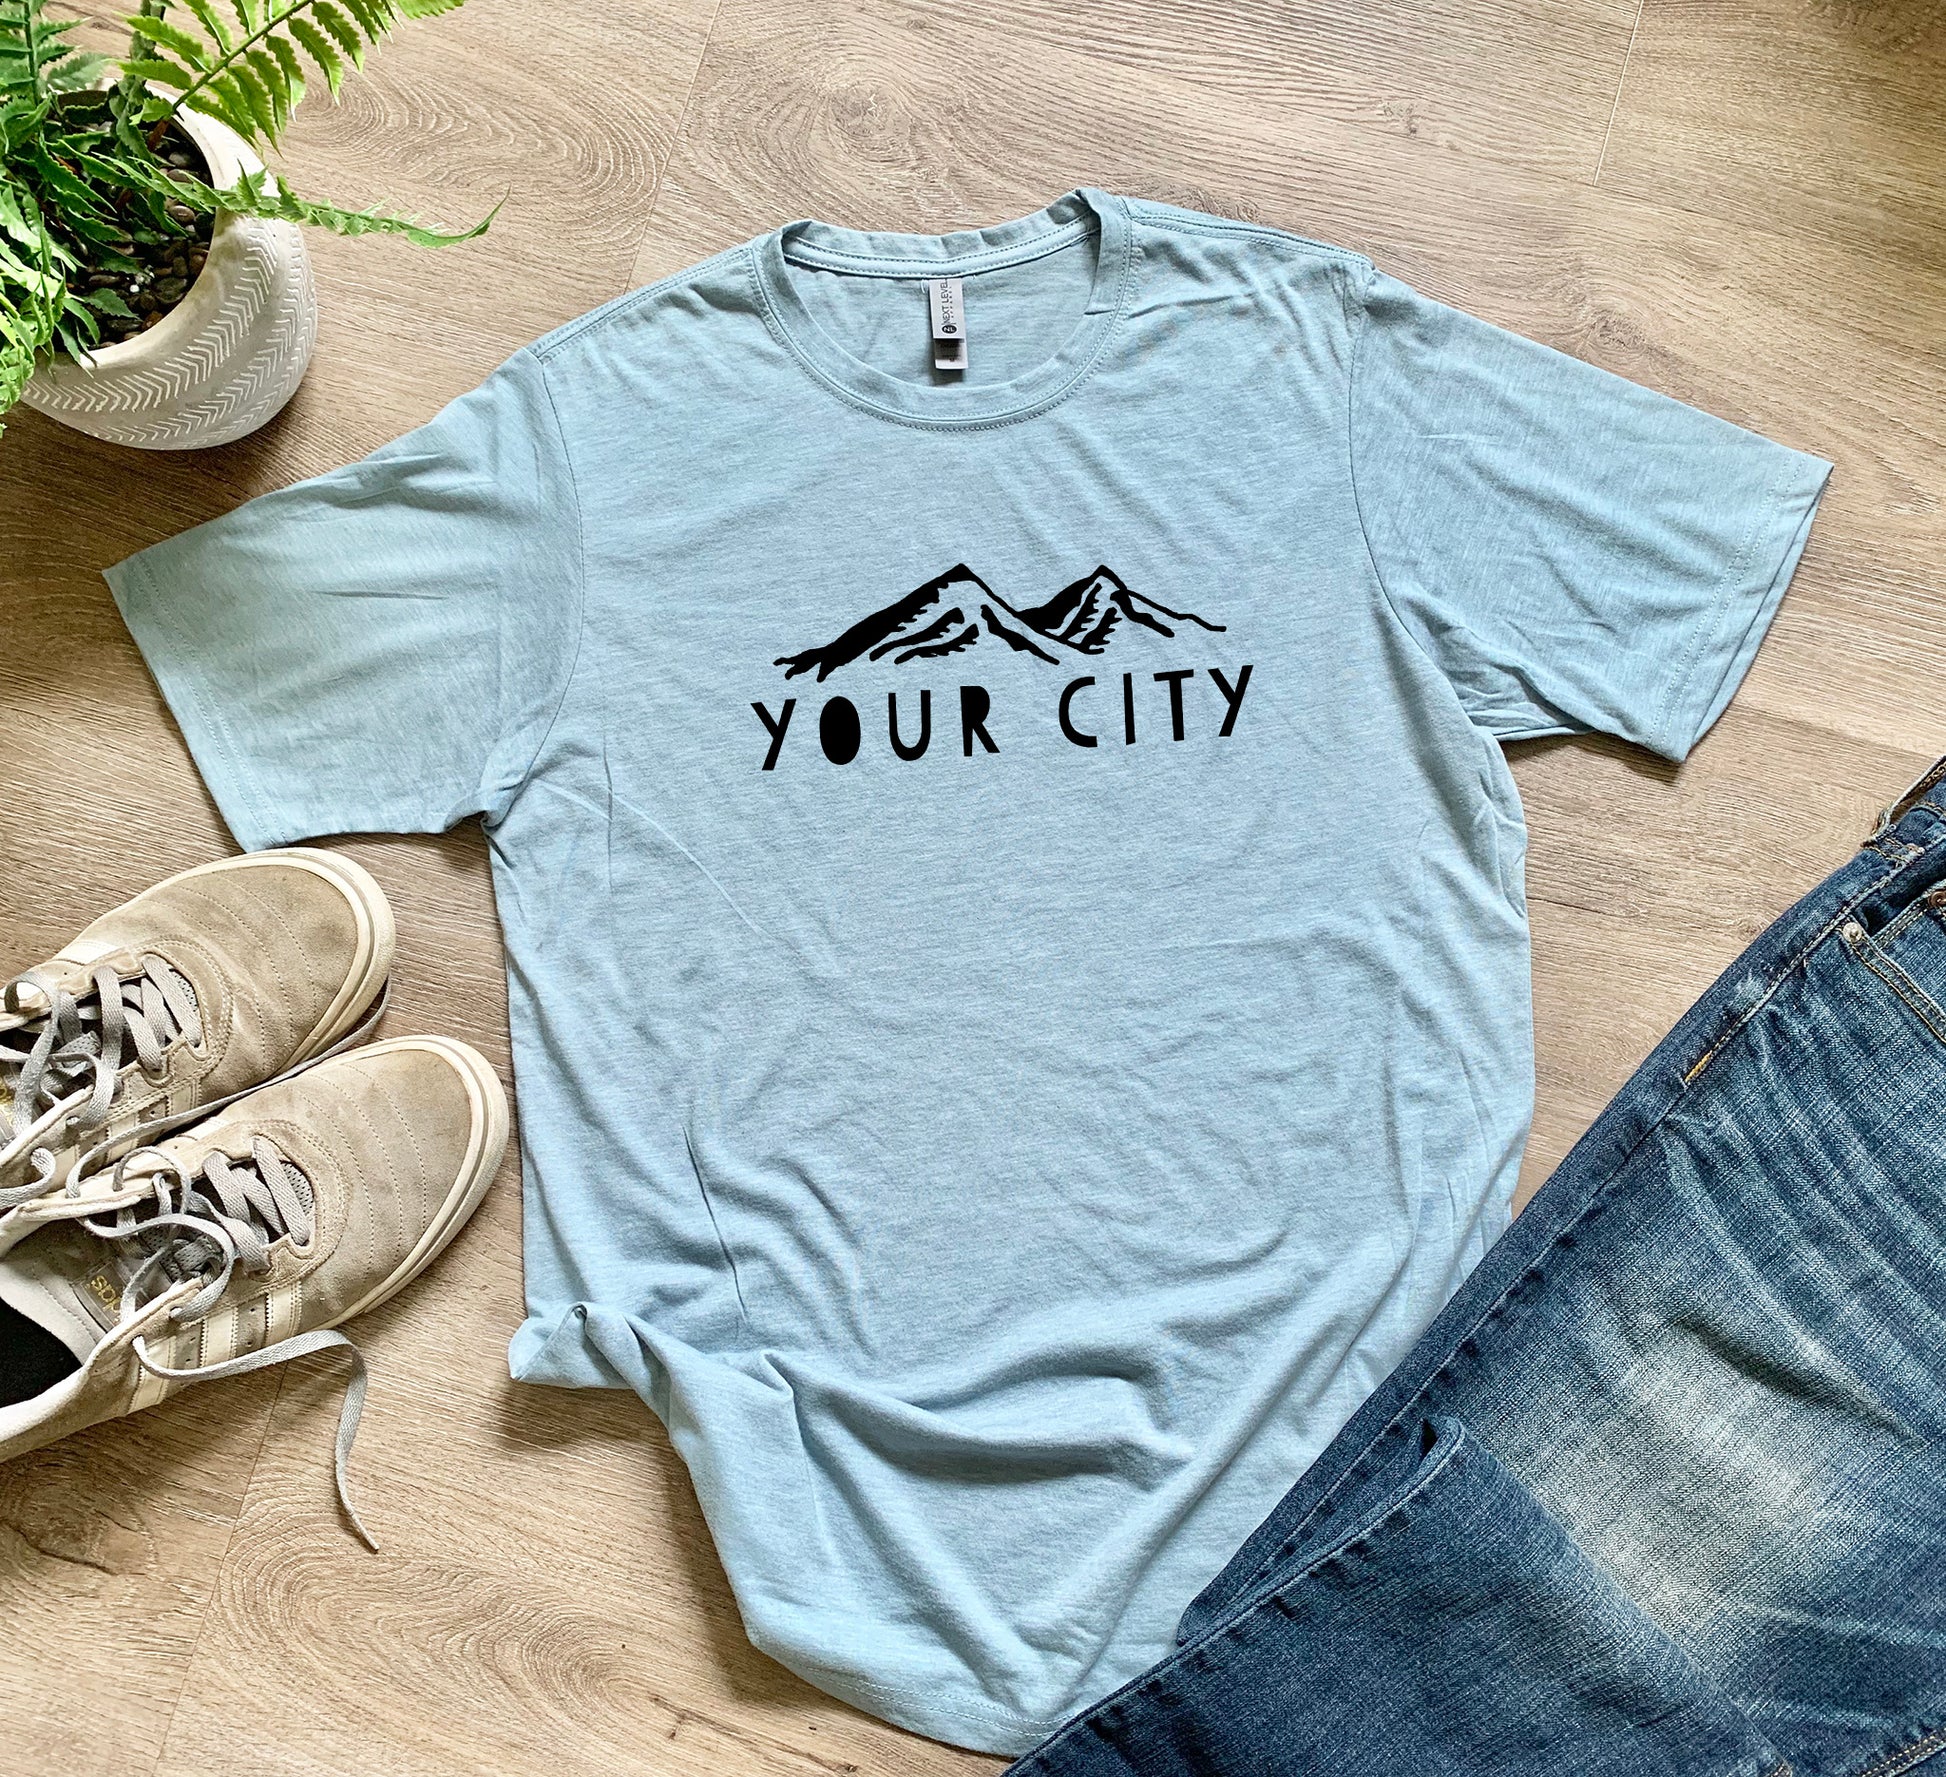 a t - shirt that says your city on it next to a pair of jeans